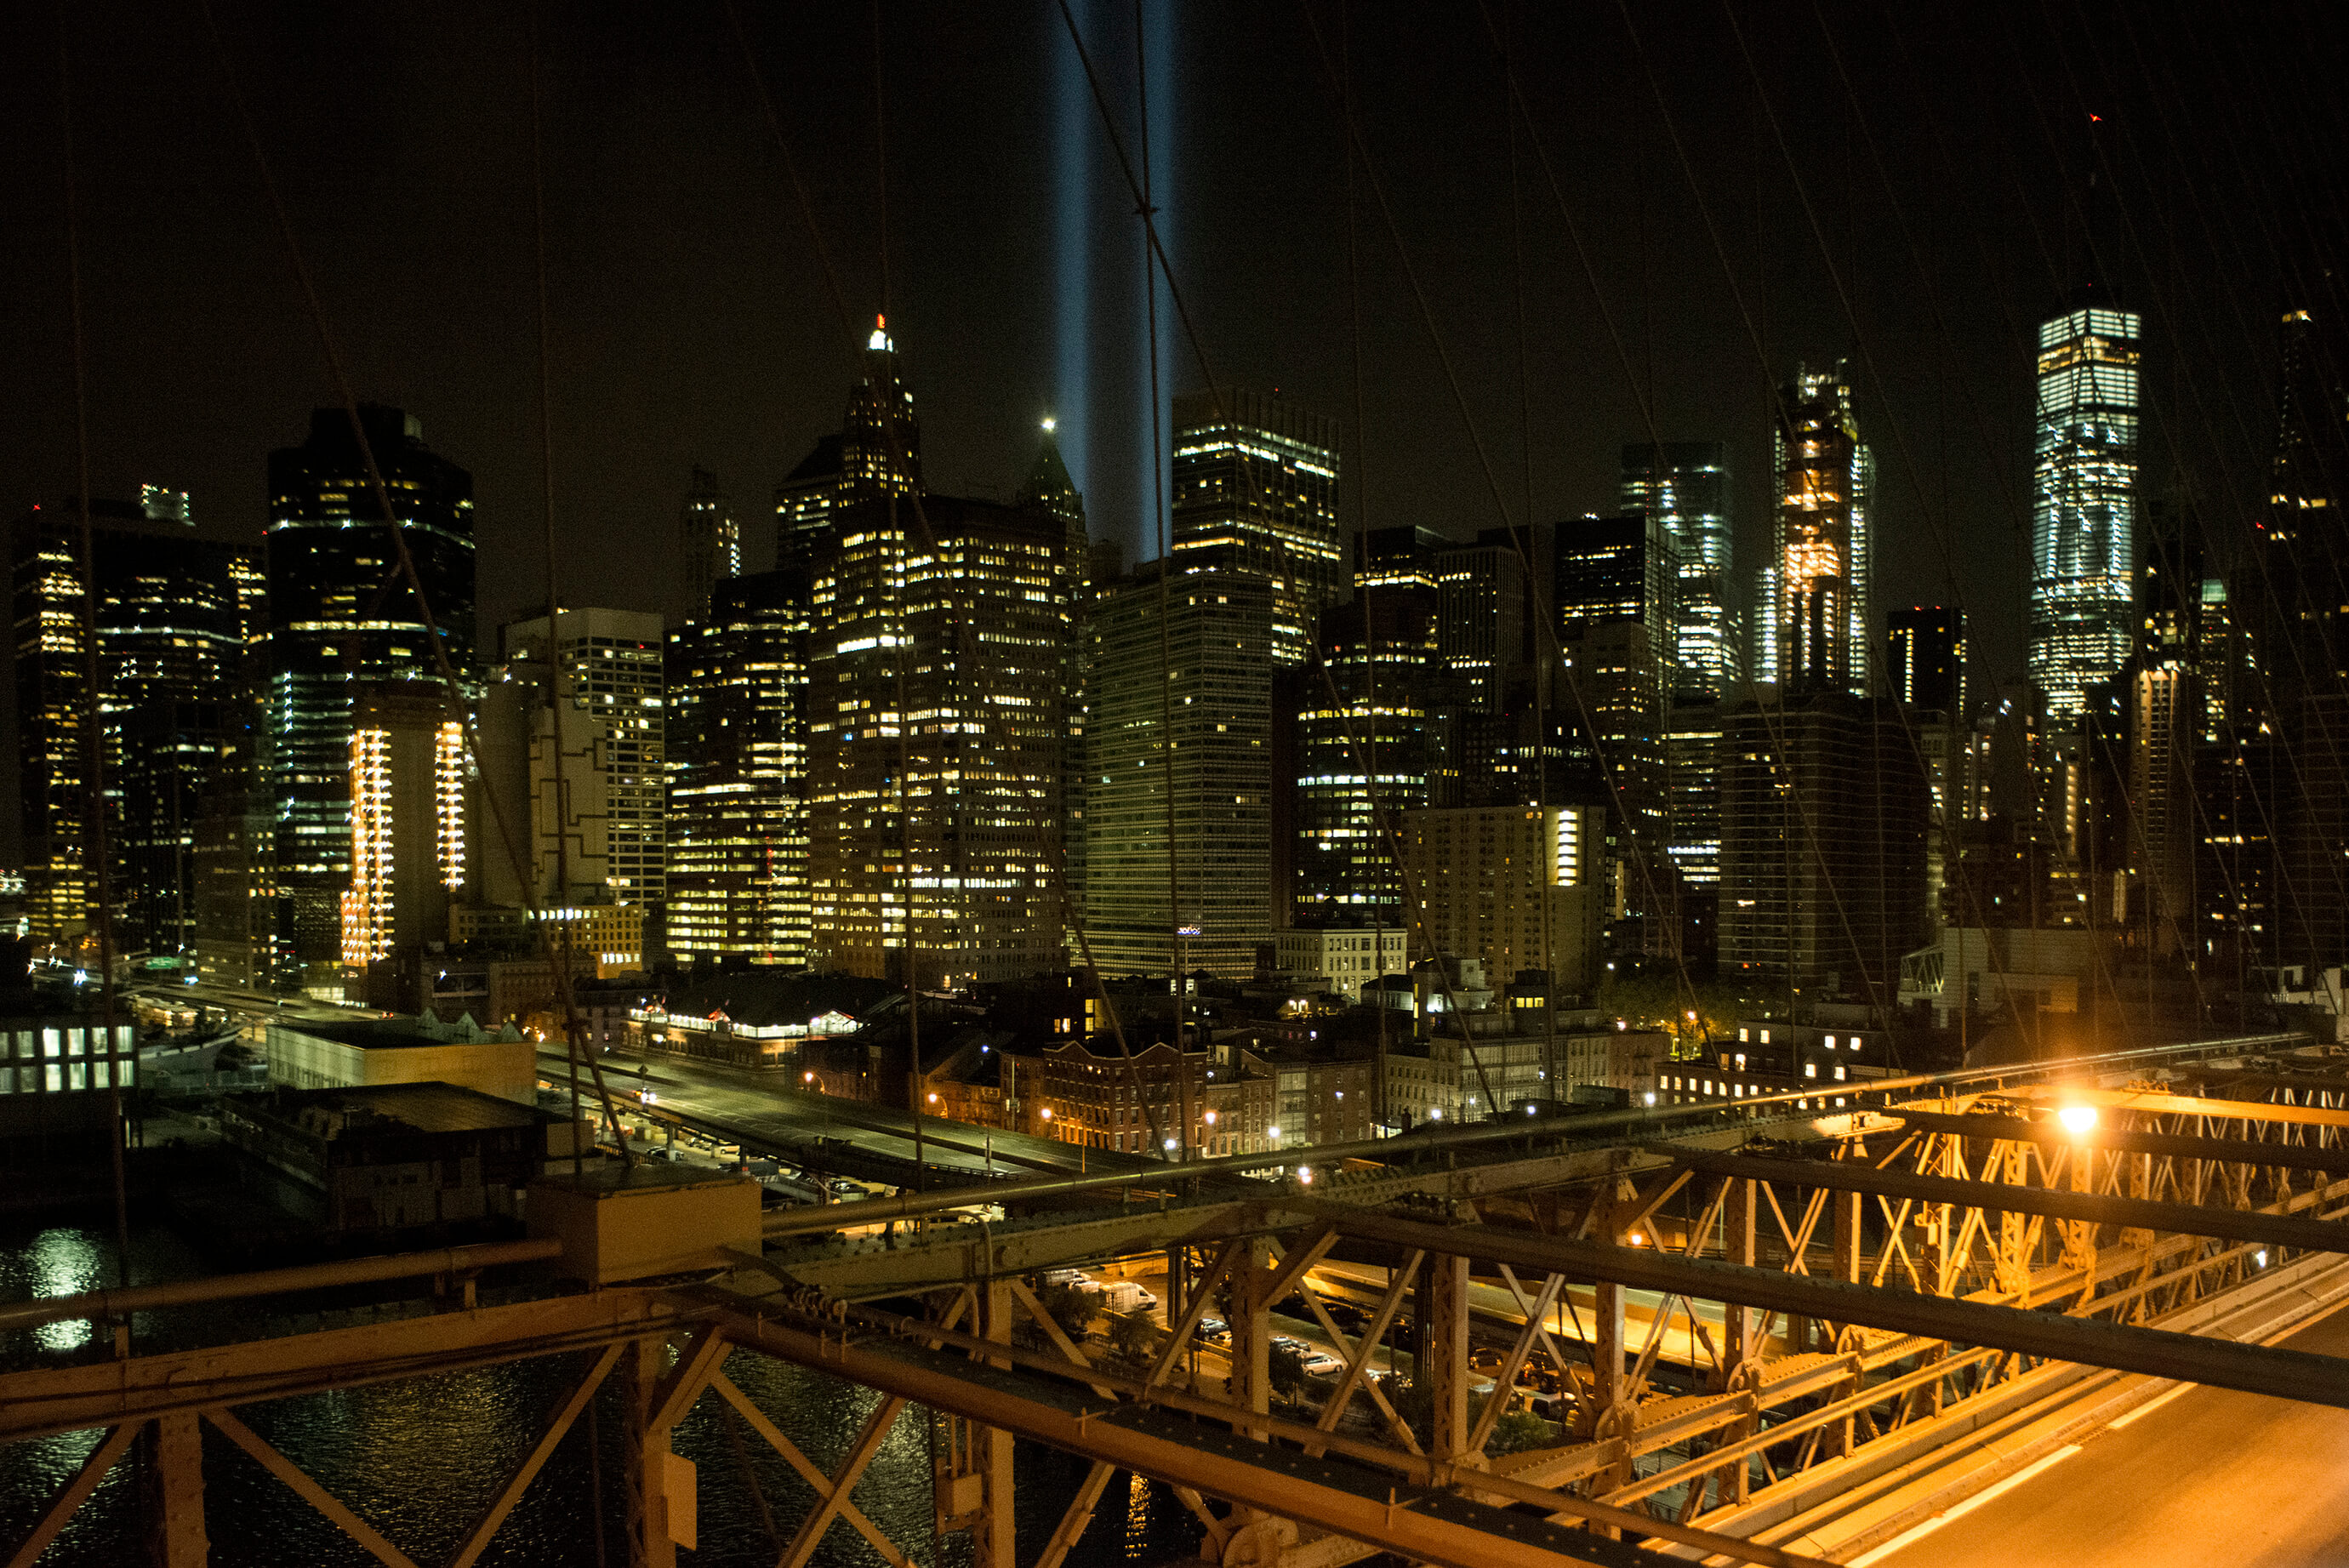 Twin towers of light above the manhattan skyline